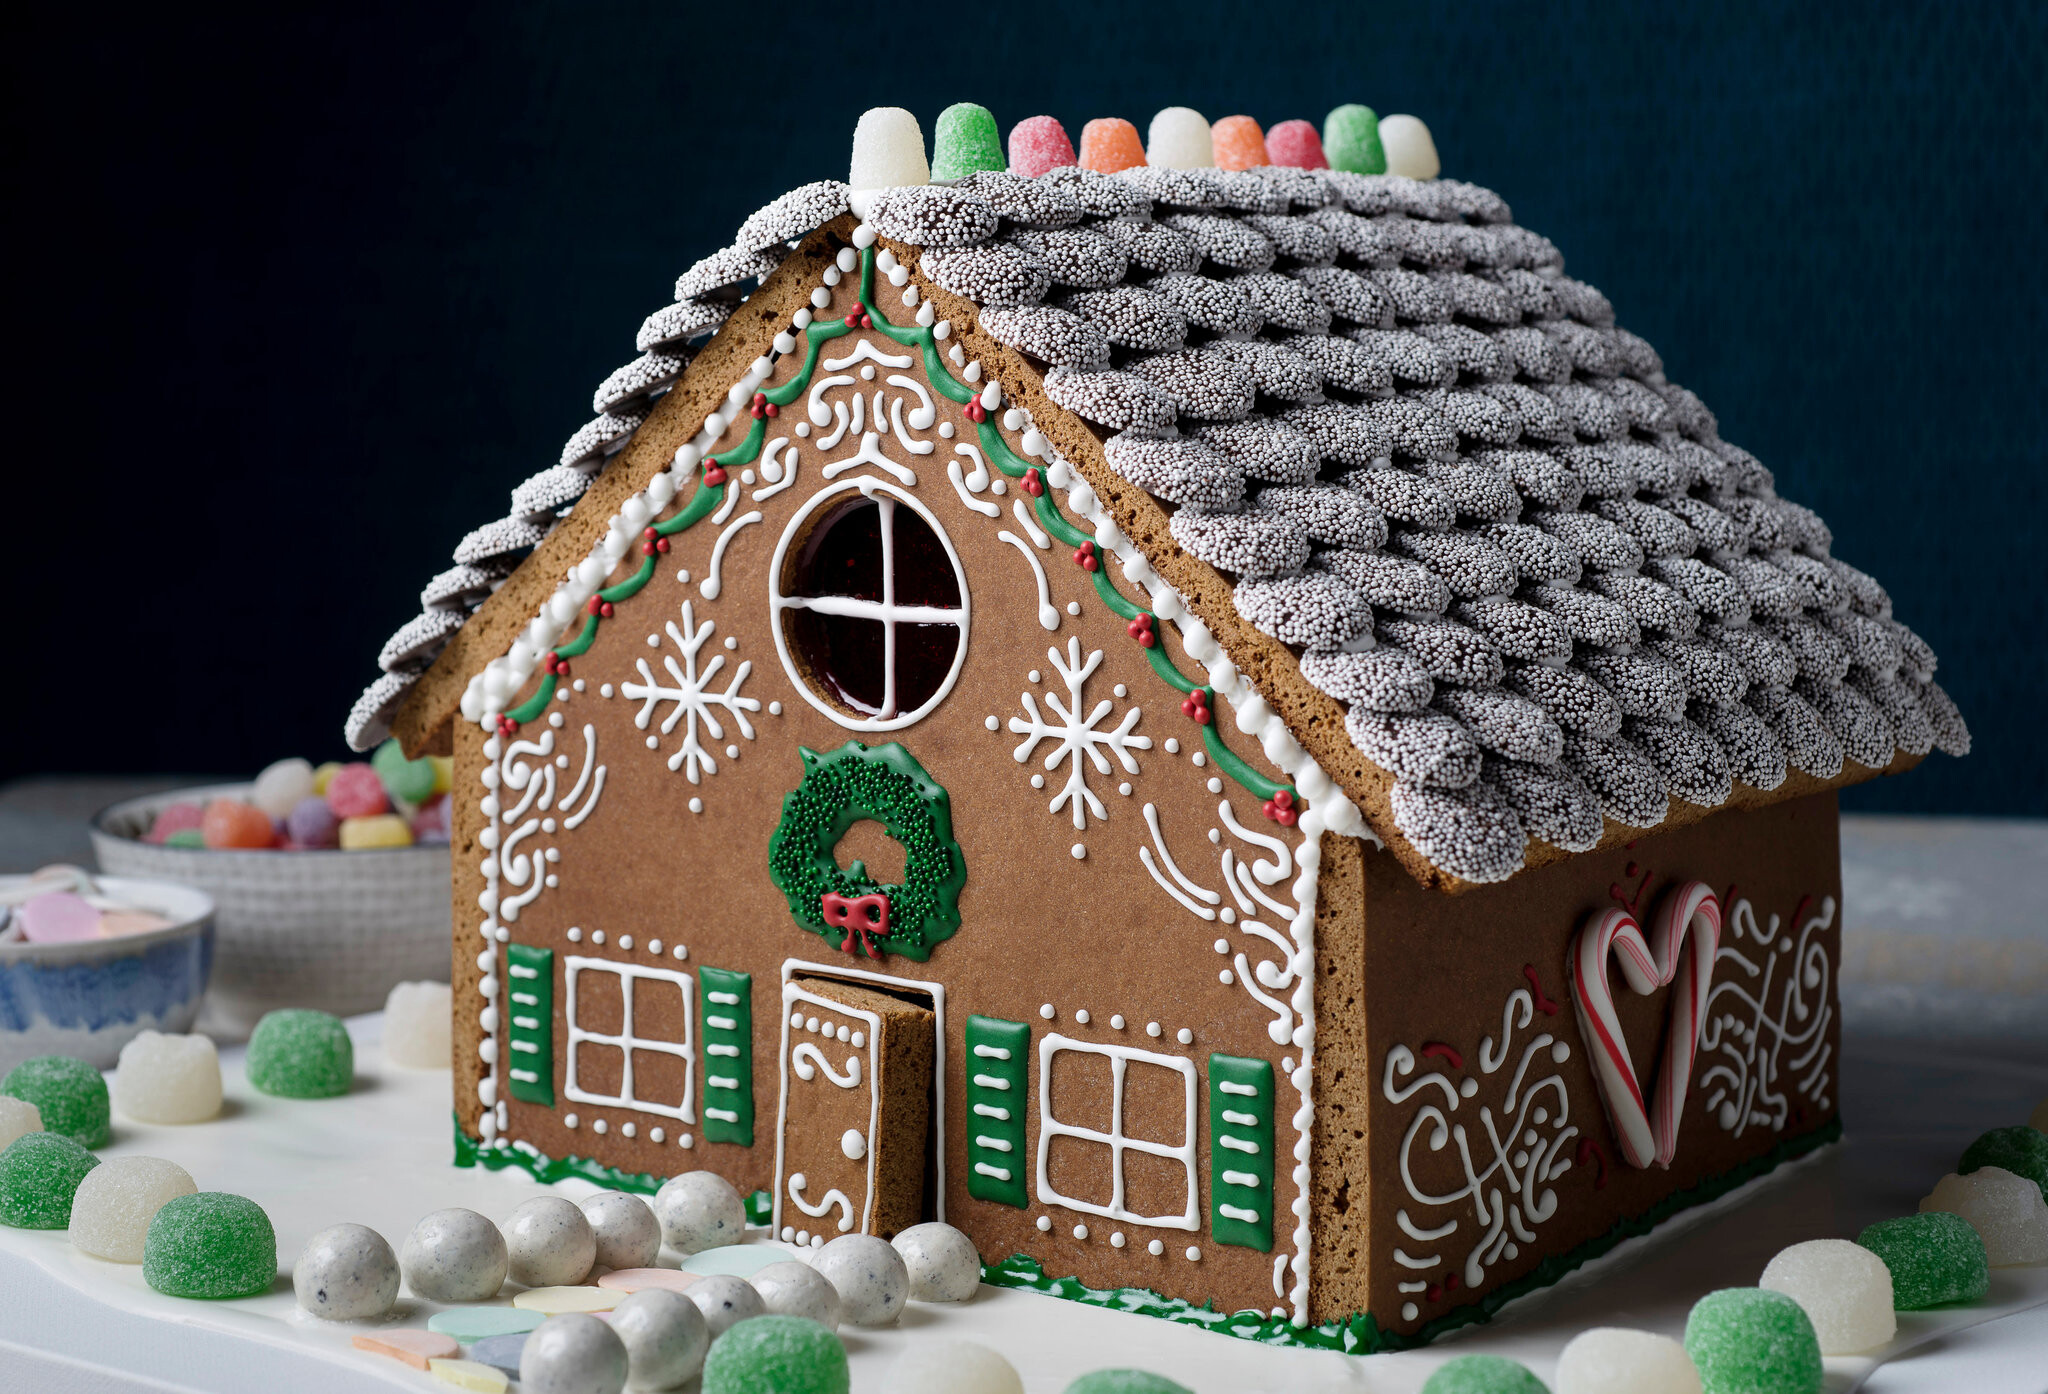 Gingerbread House: Extravagant gingerbread creations, Marshmallows, Edible pearls, Candy canes. 2050x1400 HD Wallpaper.